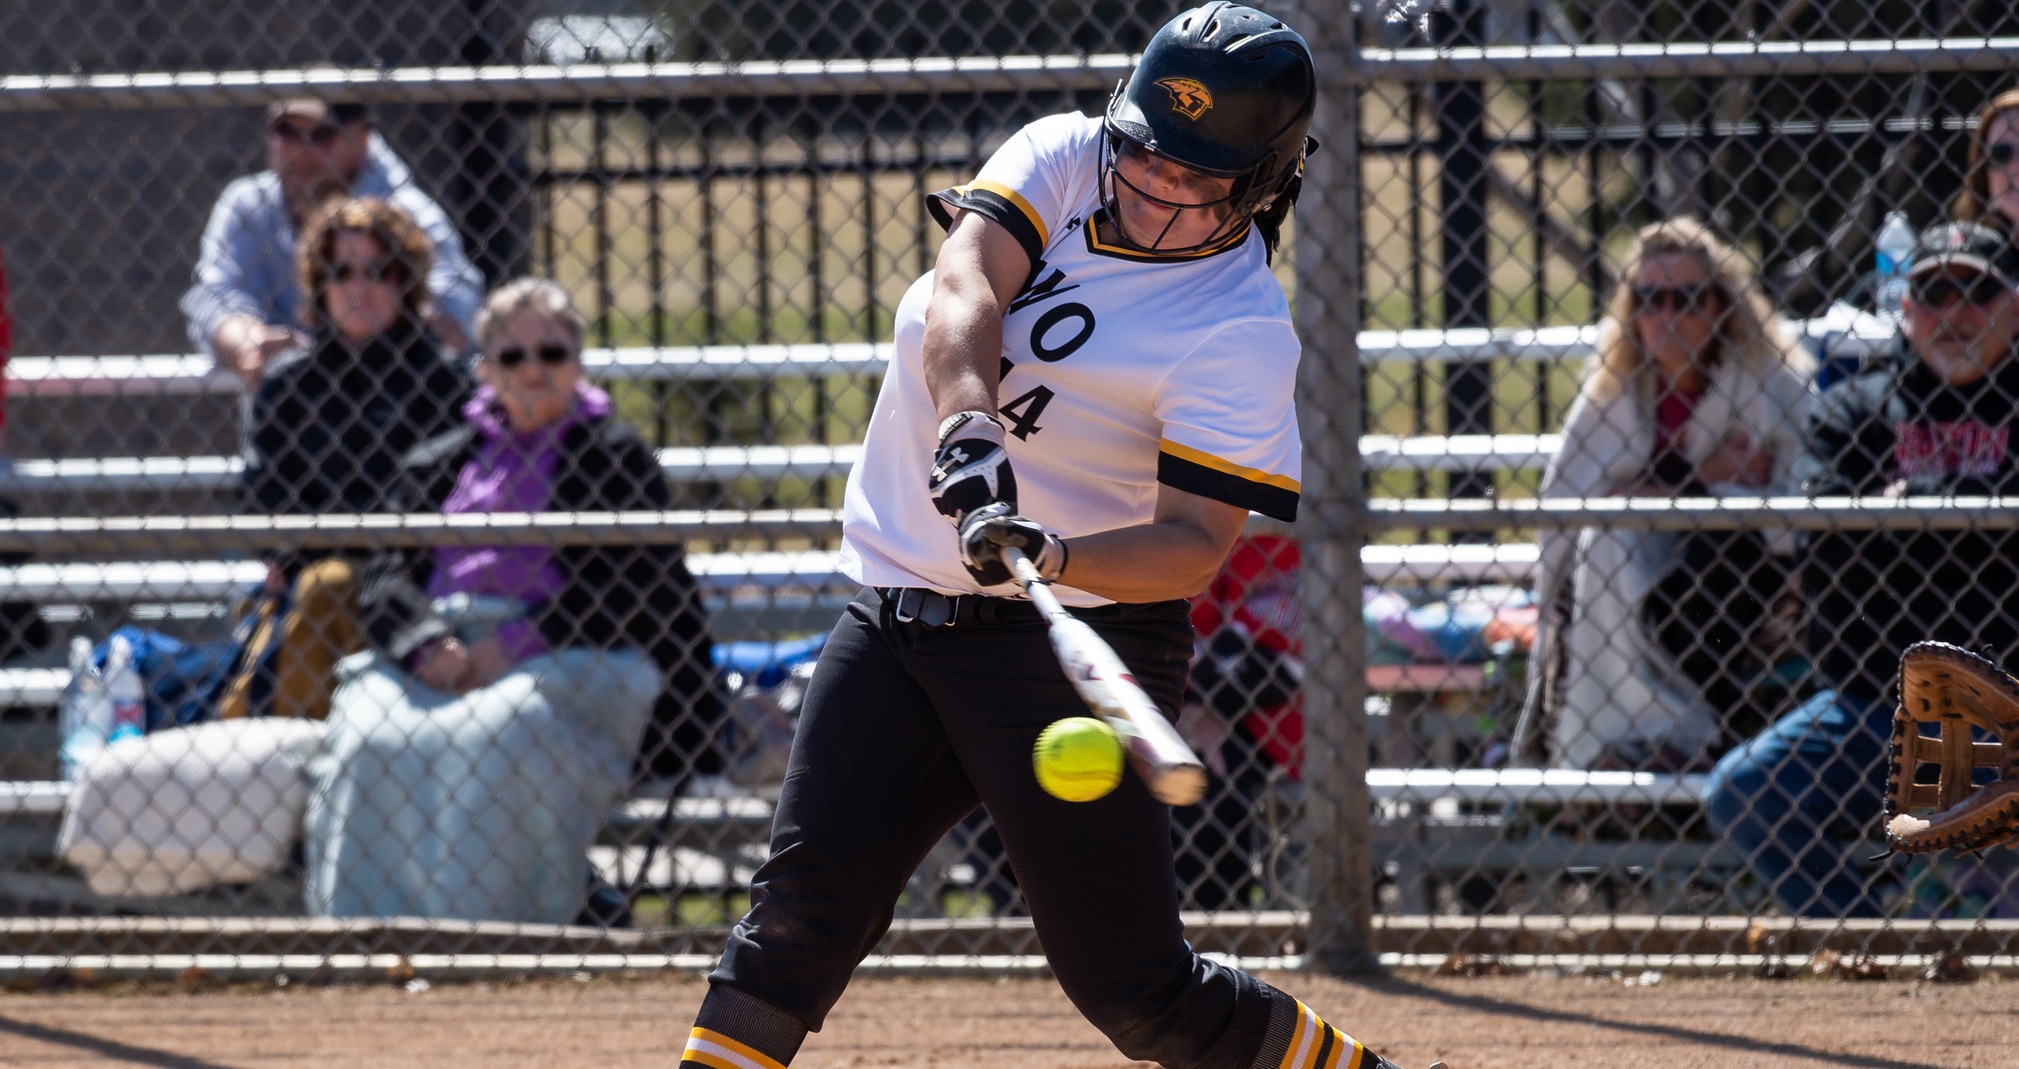 Kaitlyn Krol drove in a career-high four runs in the second game as the Titans swept the Blugolds.